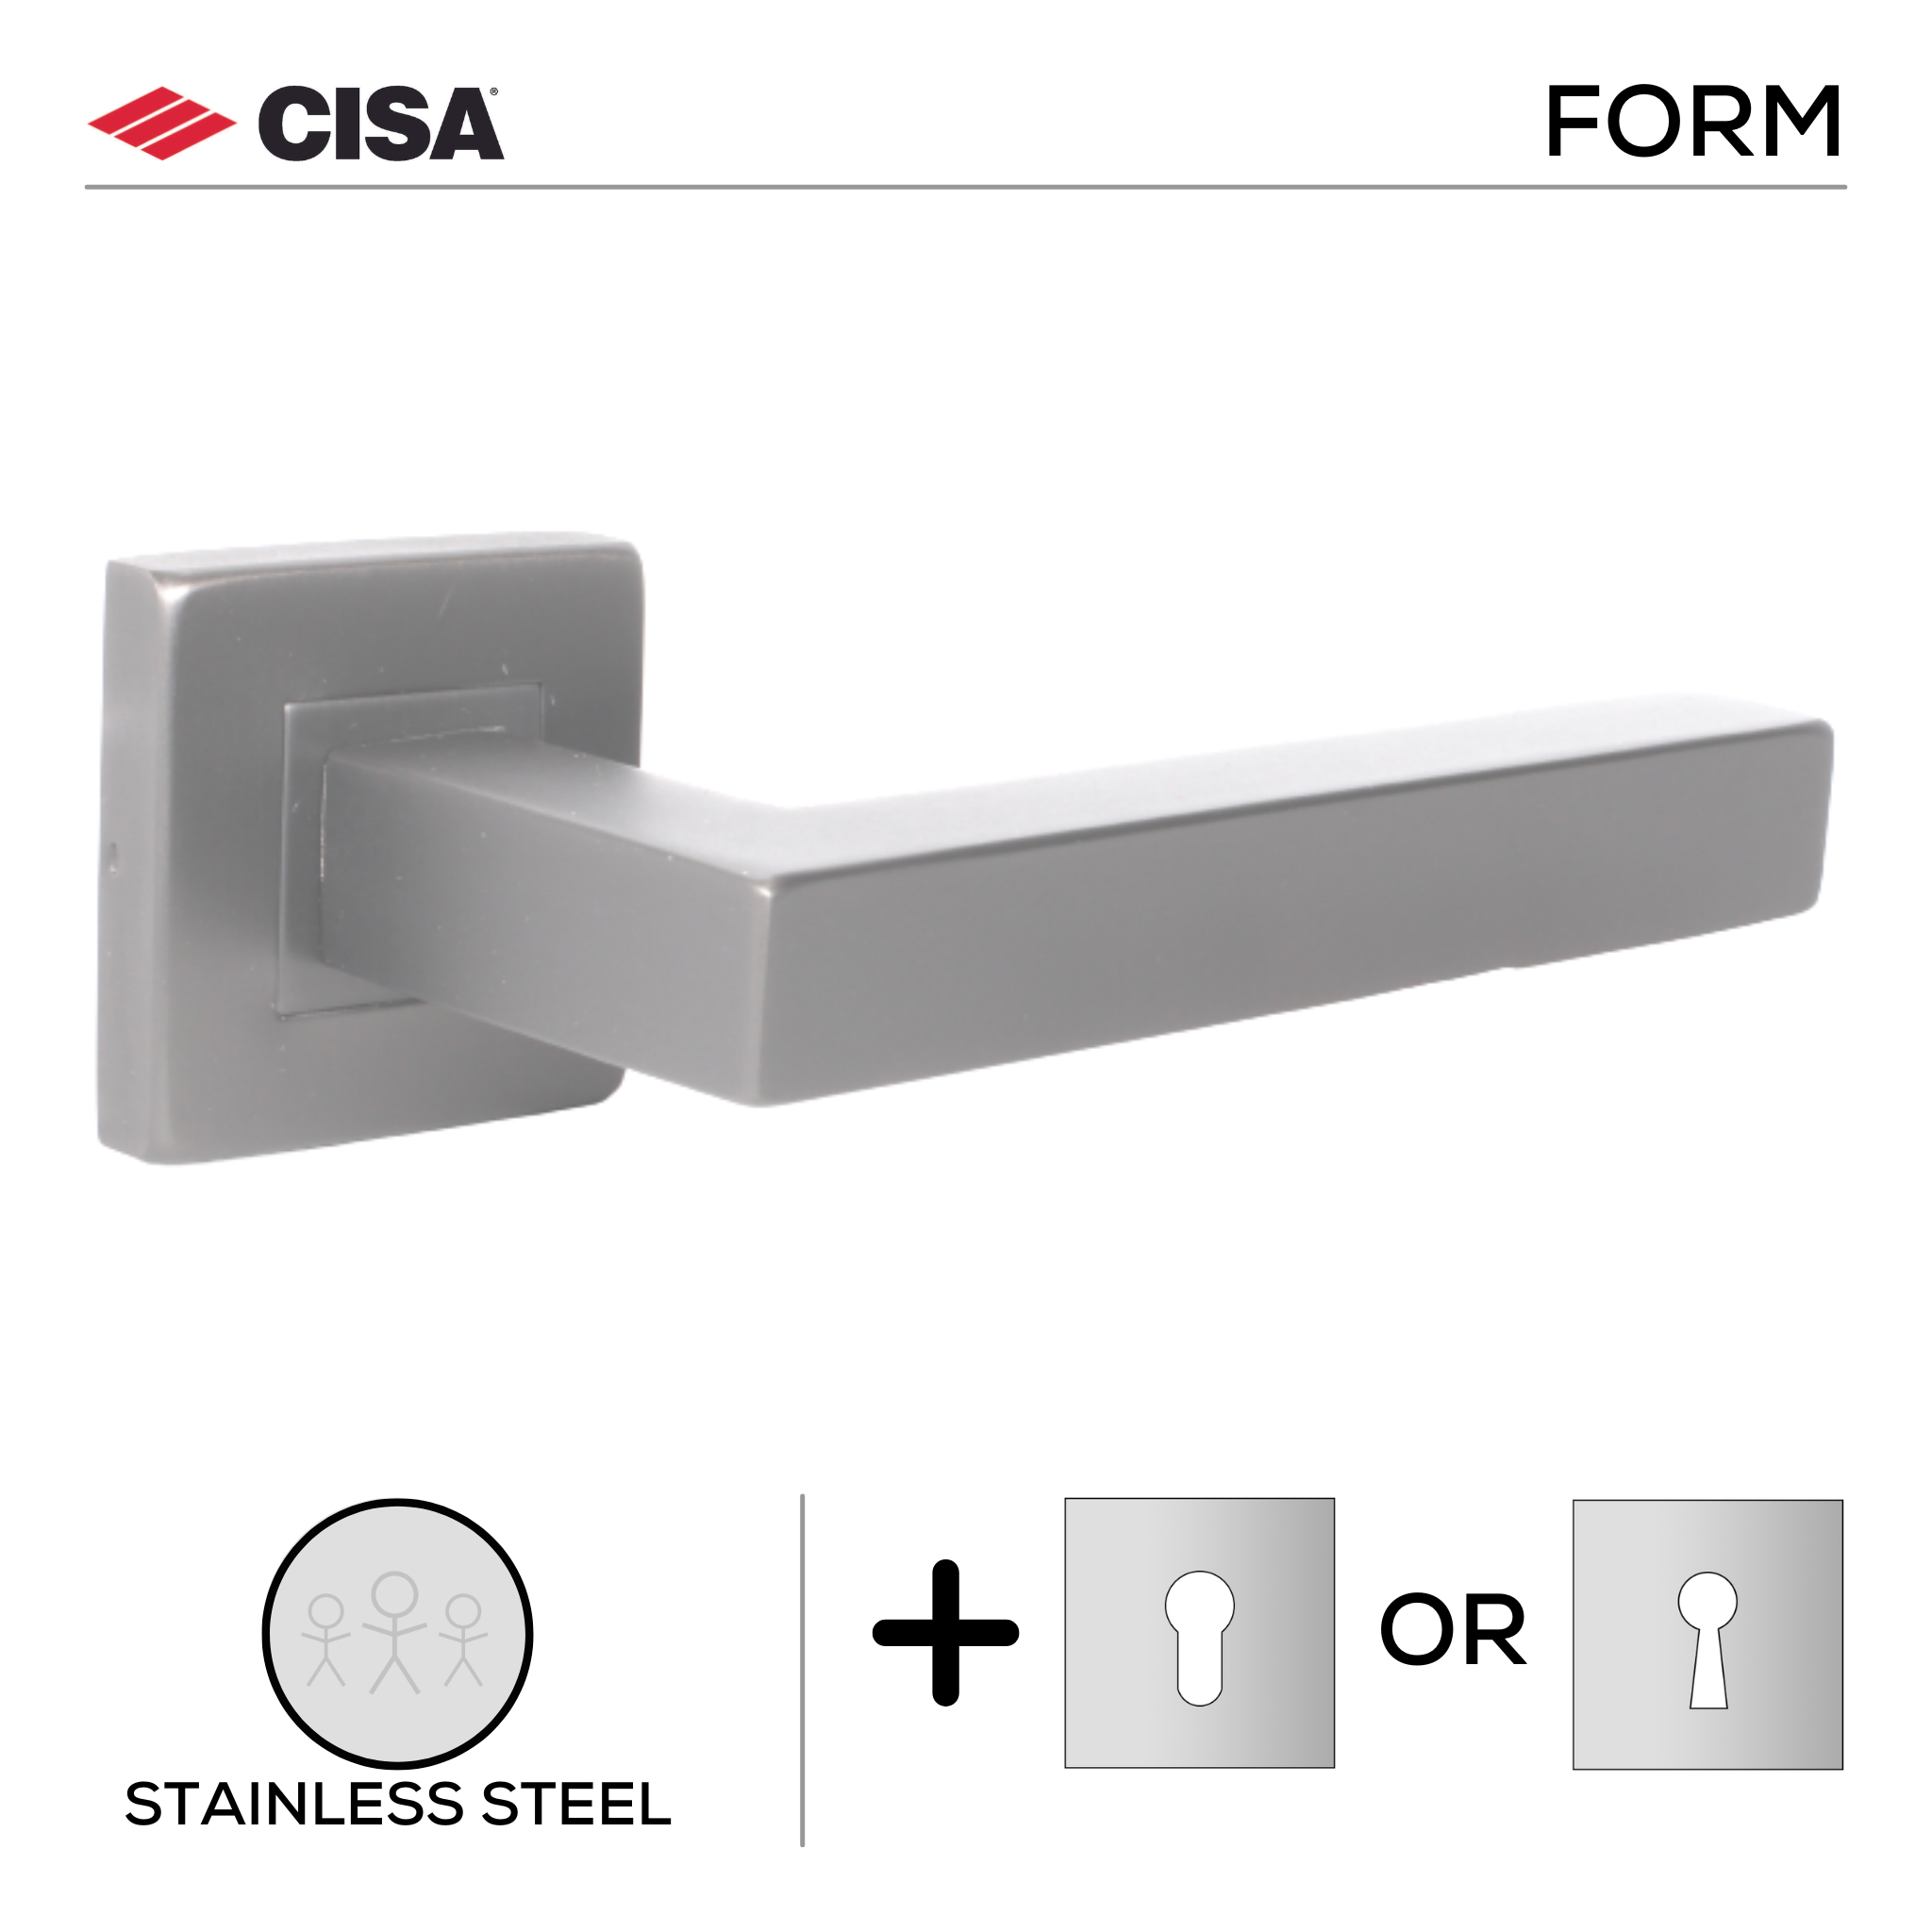 FS201.S._.SS, Lever Handles, Form, On Square Rose, With Escutcheons, Stainless Steel, CISA